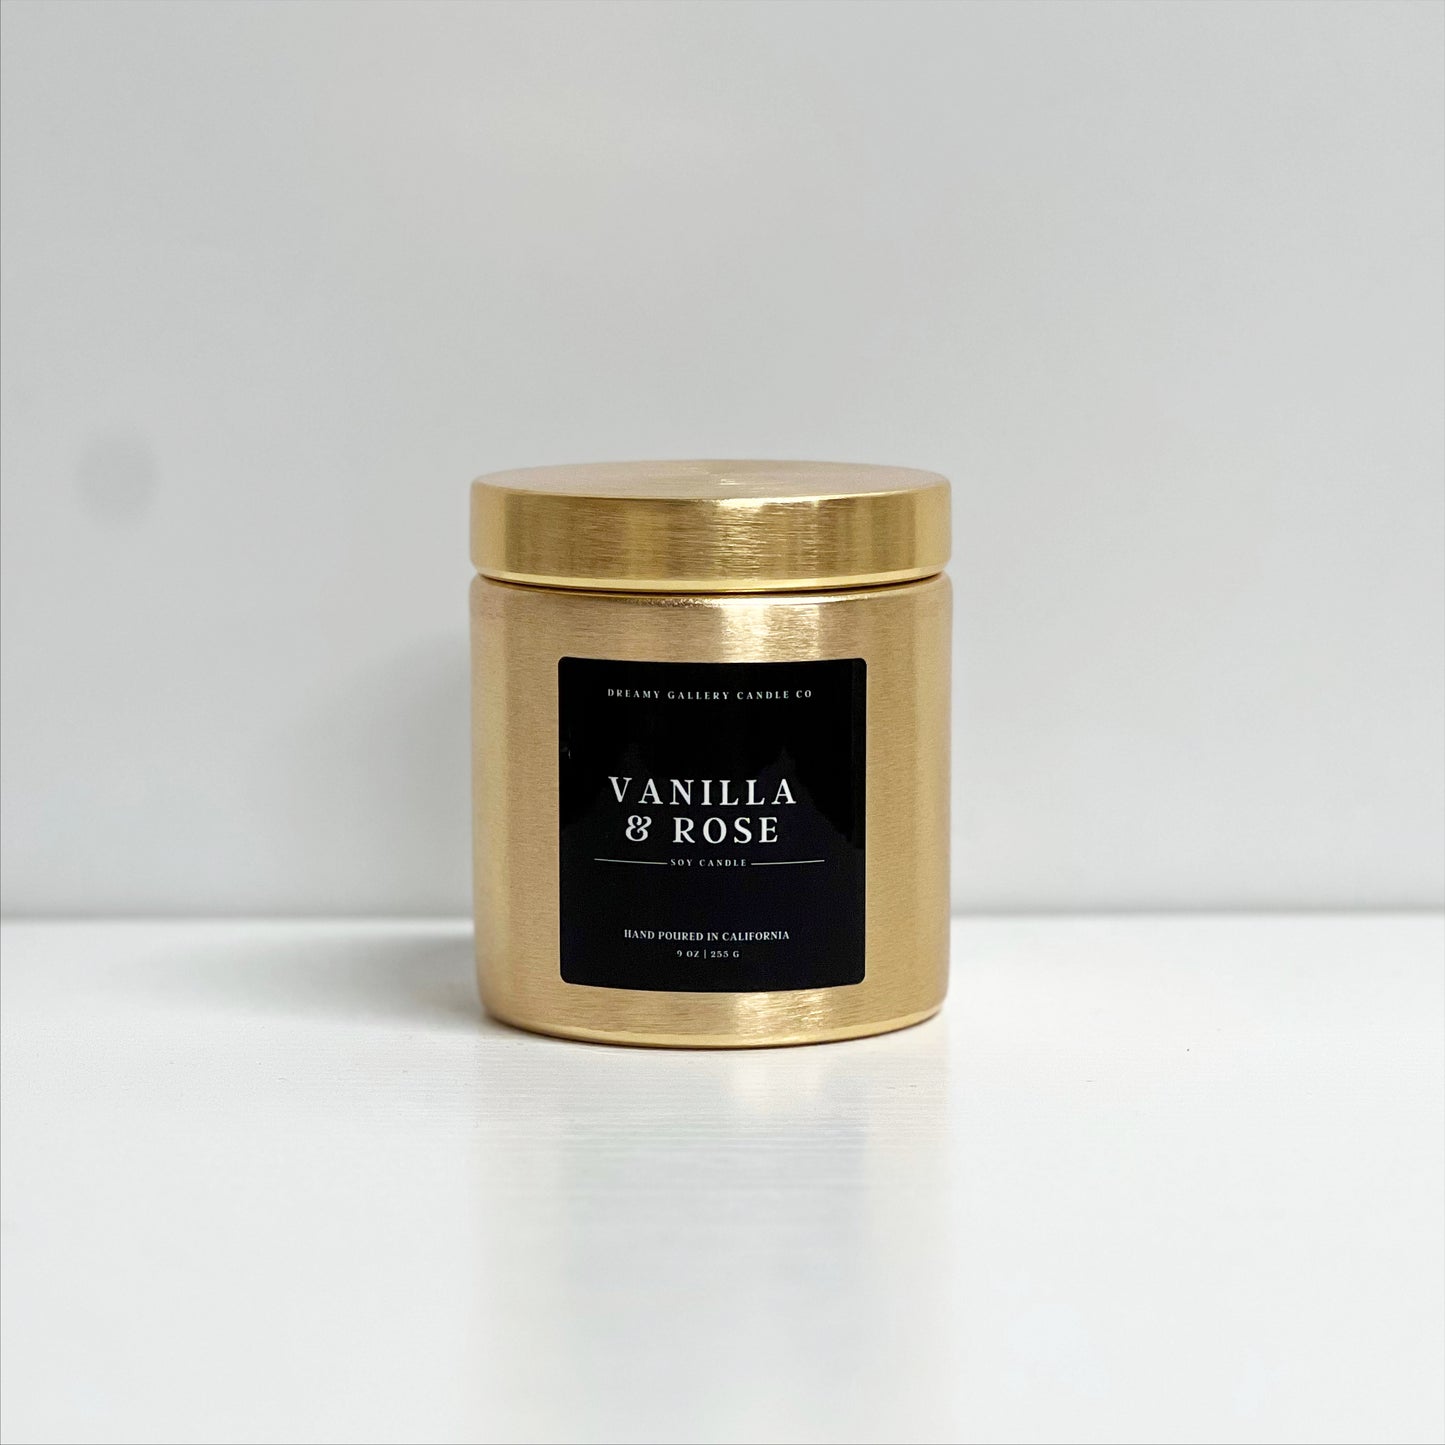 VANILLA & ROSE CLASSIC SOY CANDLE